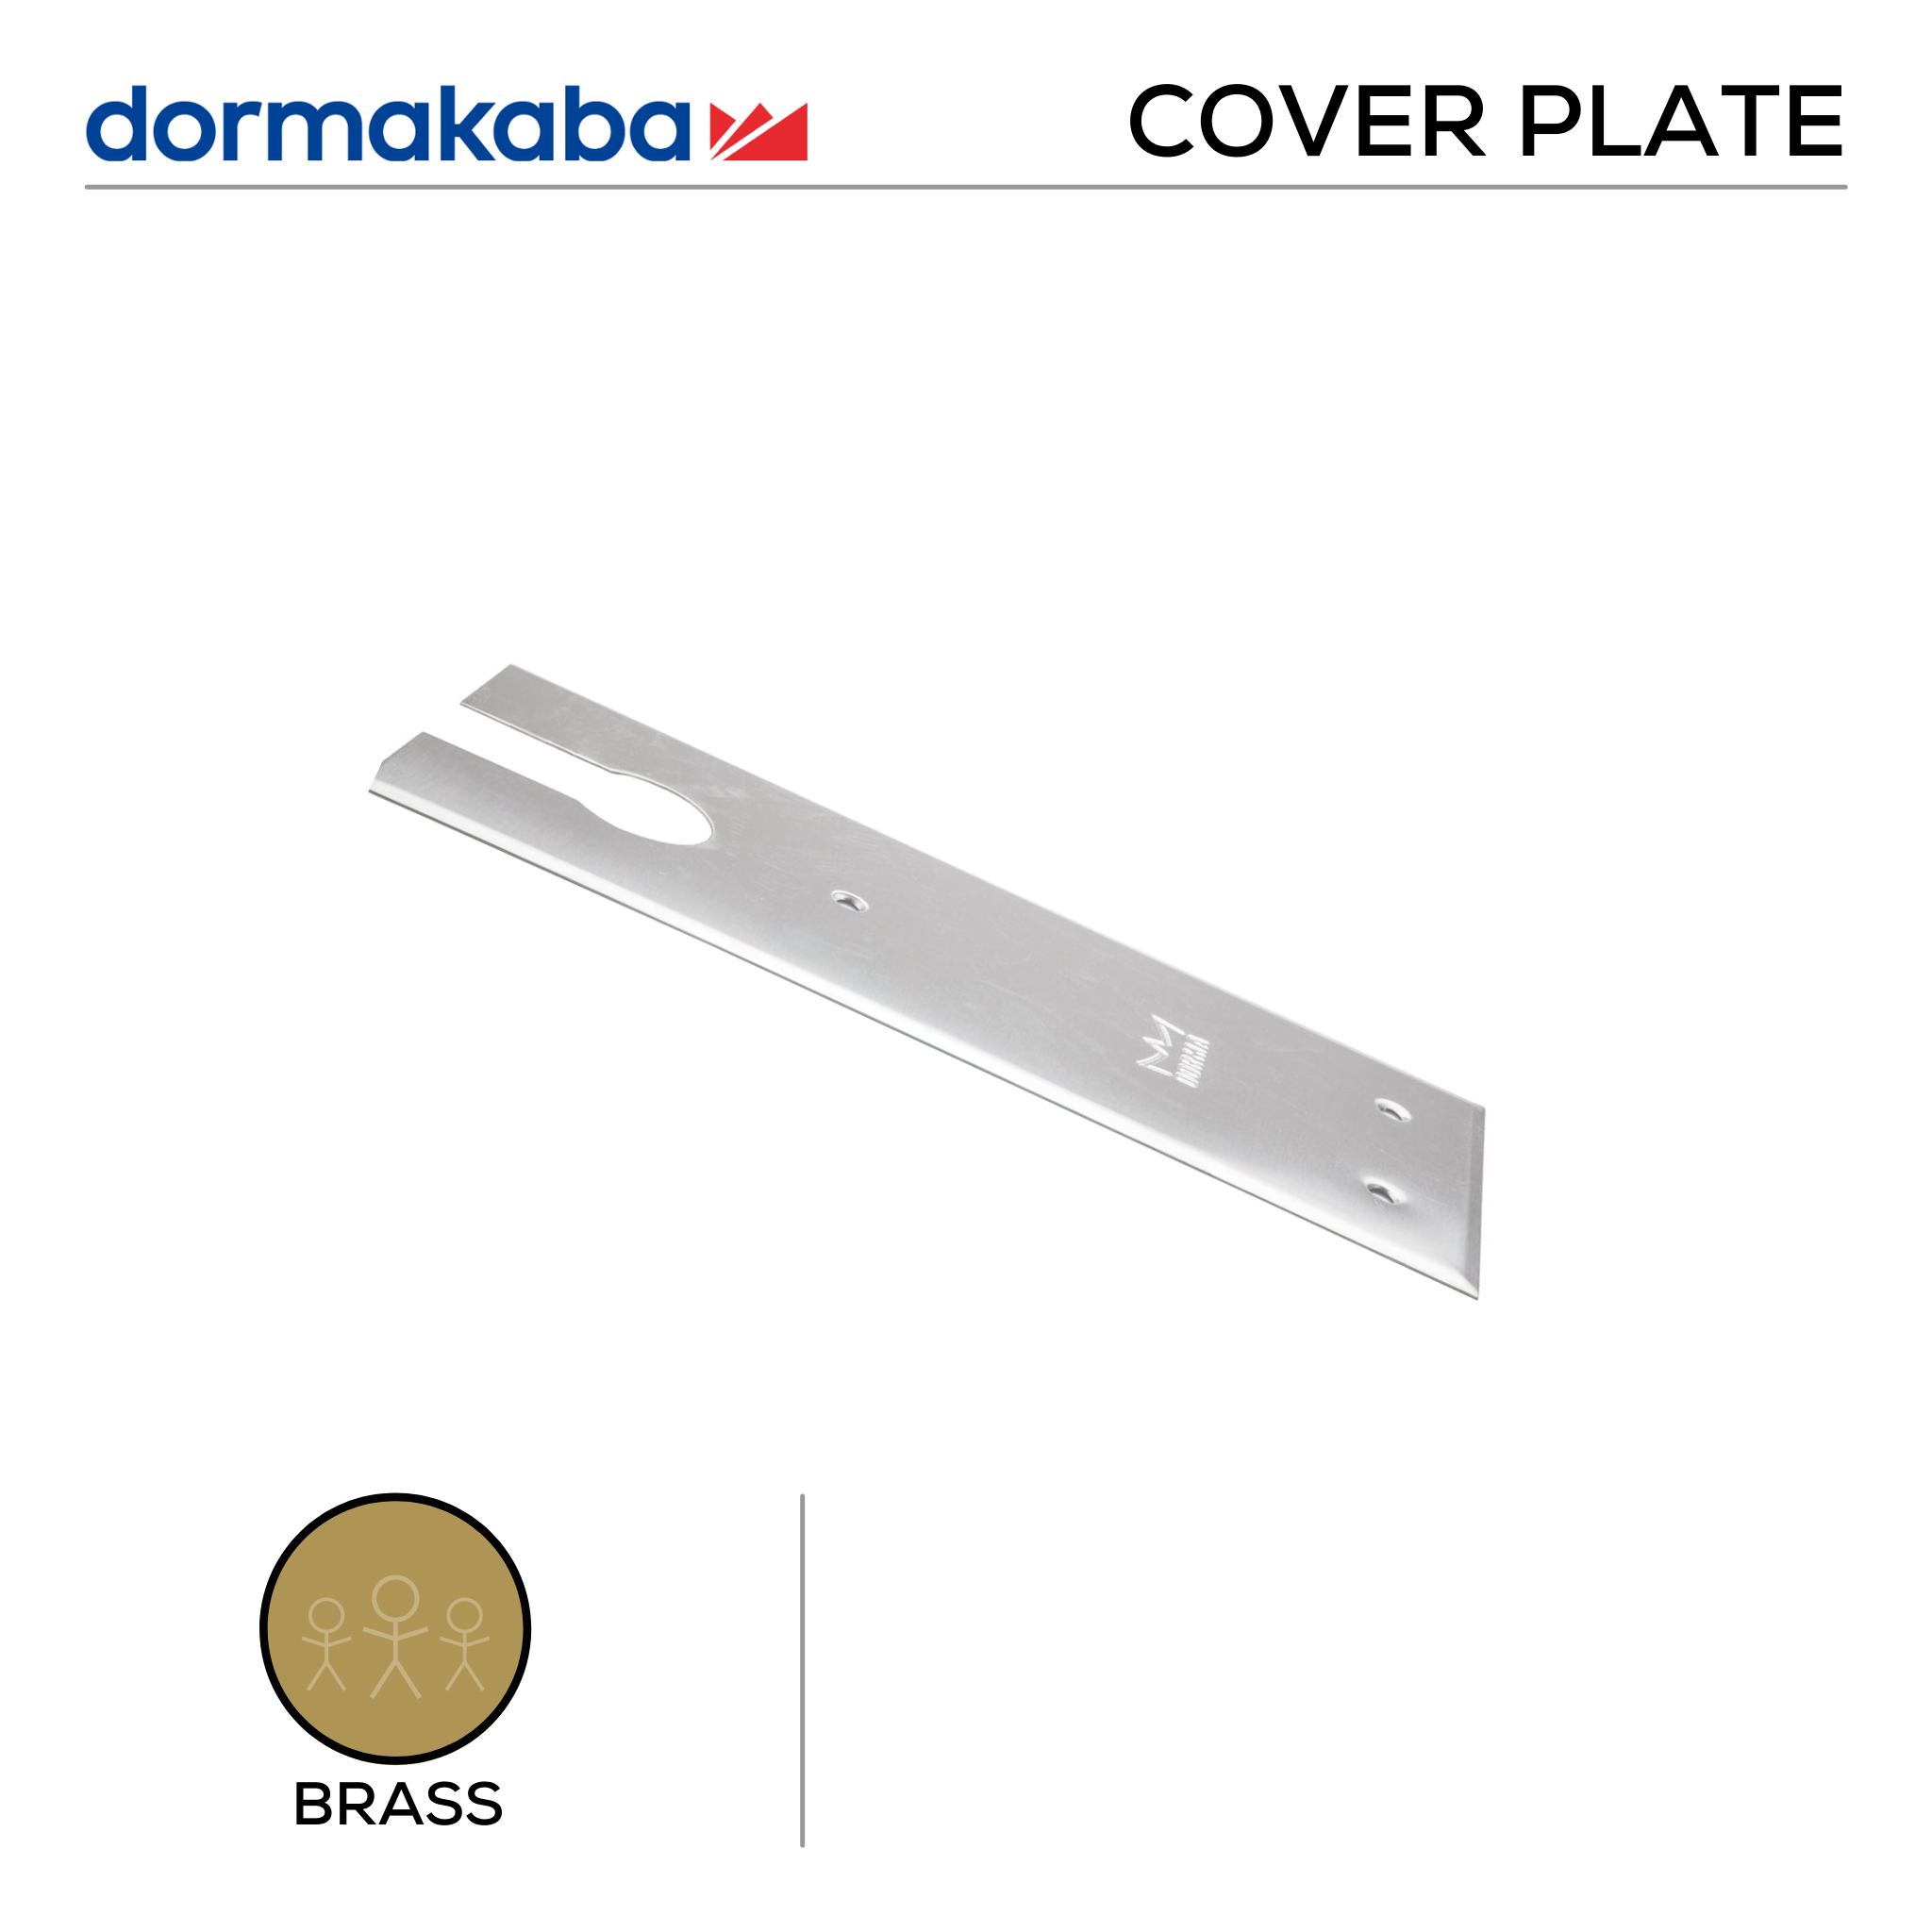 BTS 84 Cover Plate 8410B, Cover Plate, Brass, DORMAKABA